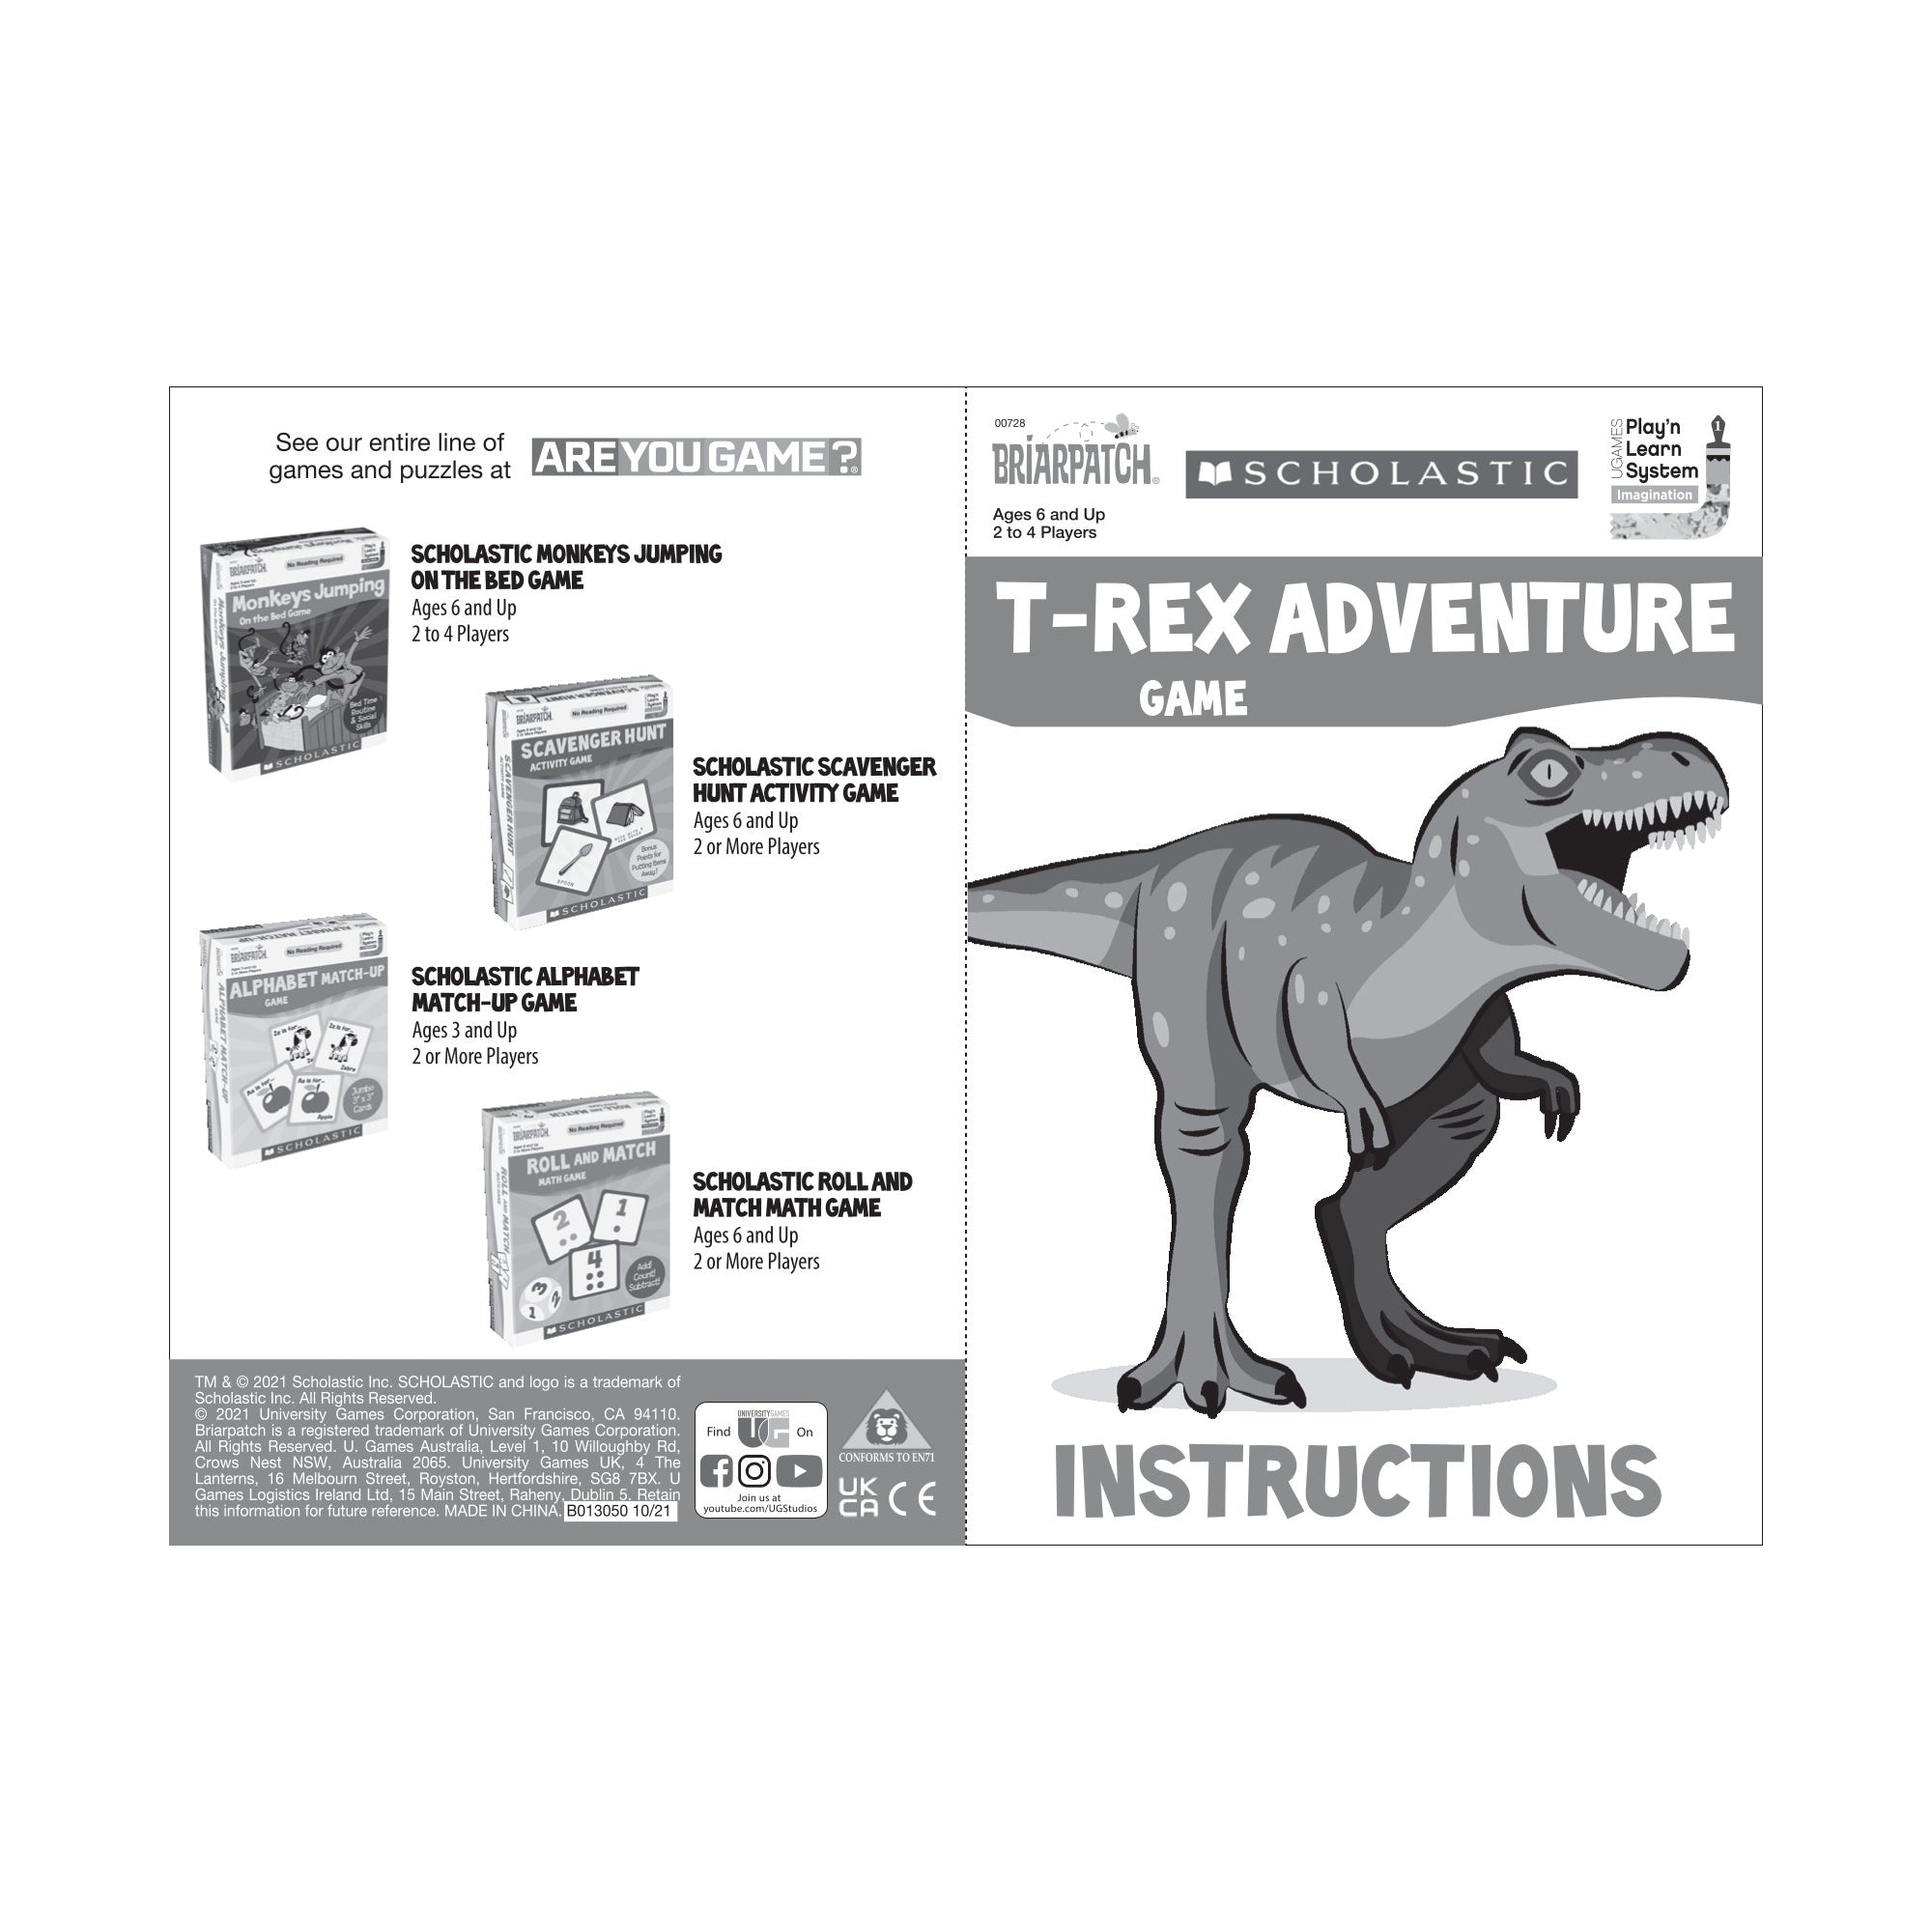 Comments 227 to 188 of 268 - T-Rex Breakout (Free Dinosaur Game